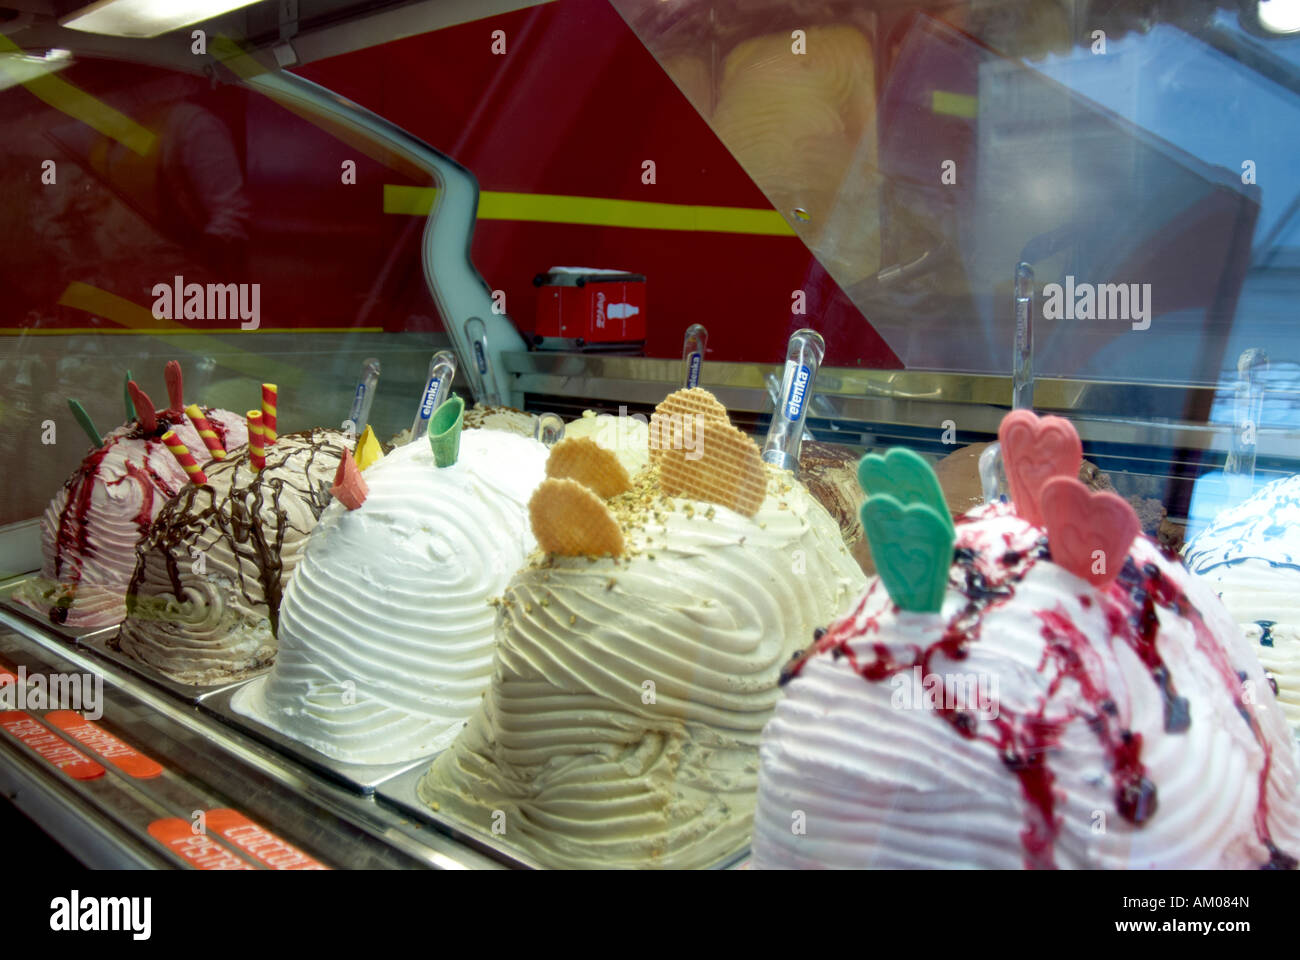 Typical Italian Ice Cream For Sale In A Refrigerated Display